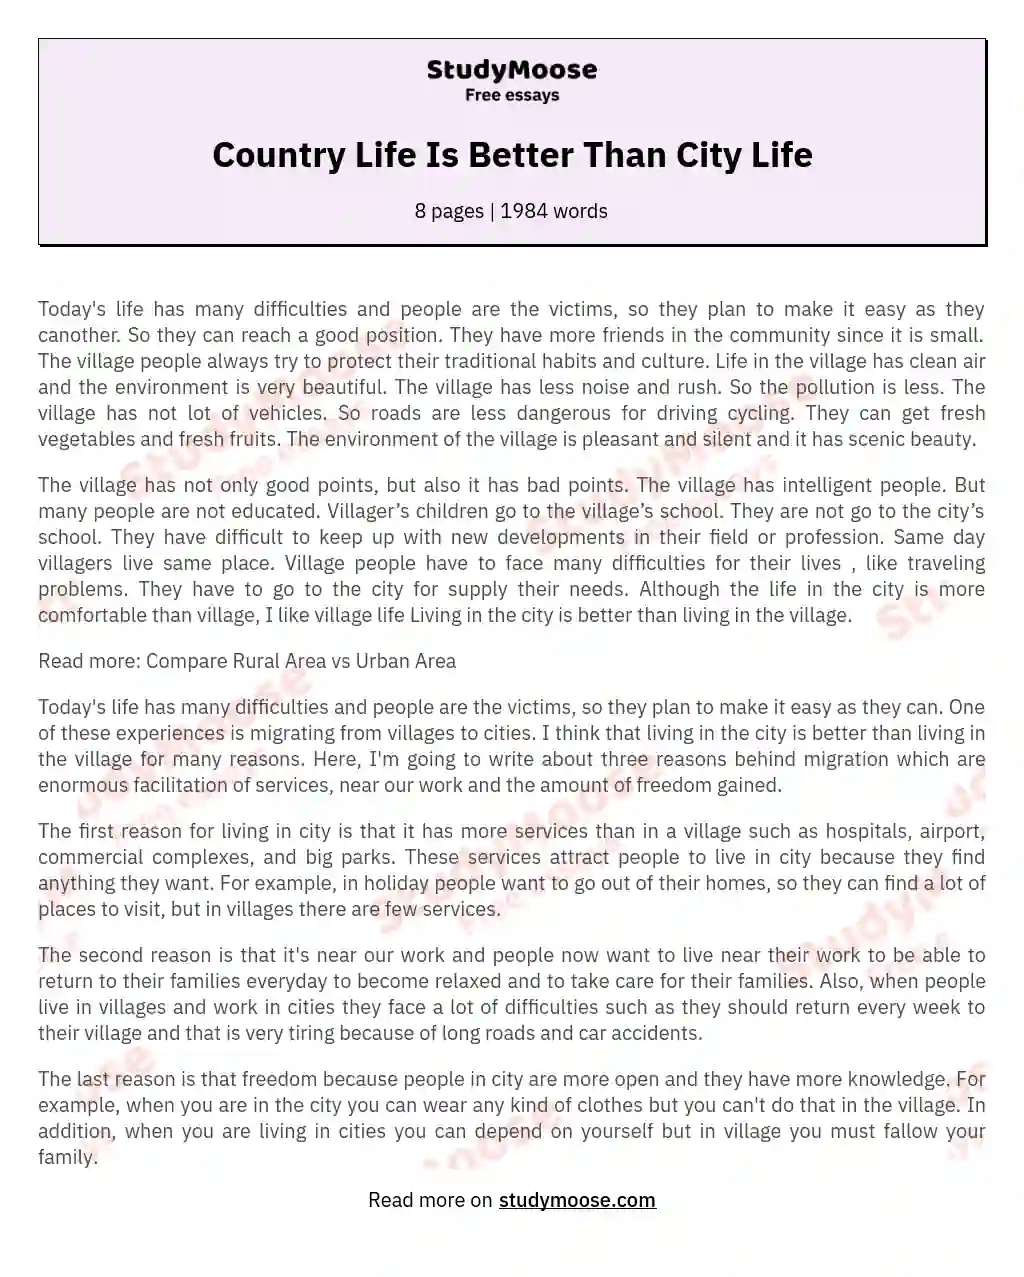 Country Life Is Better Than City Life essay